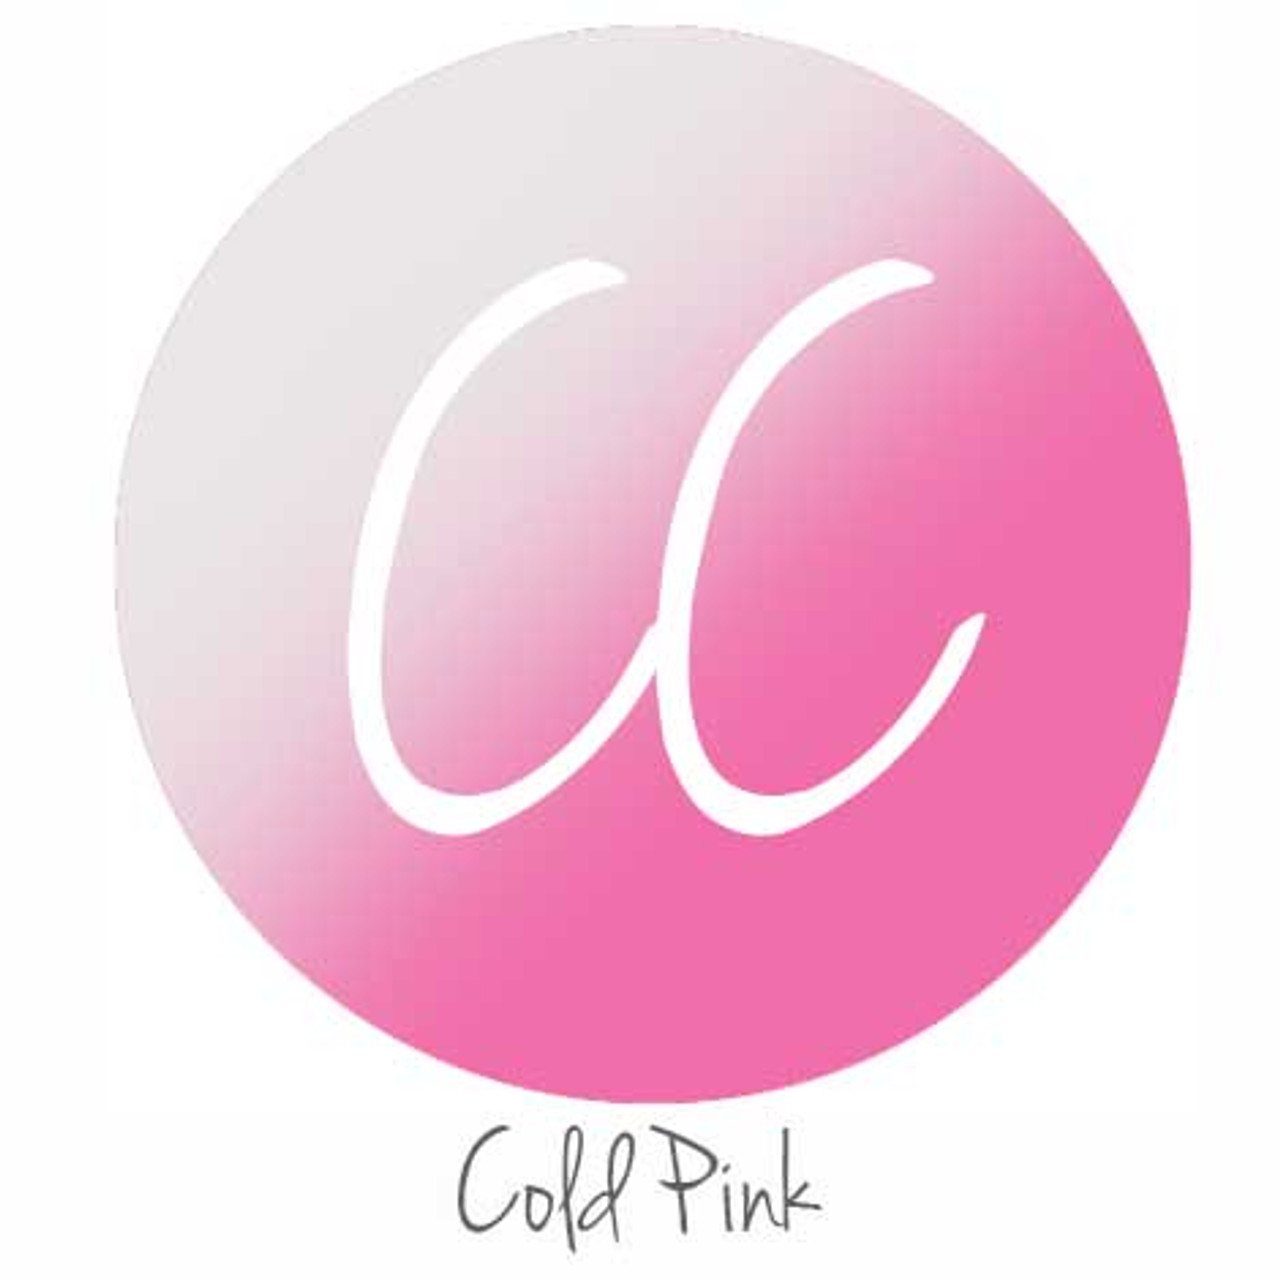 Color Changing Vinyl - Cold Pink - 12x12 Sheet